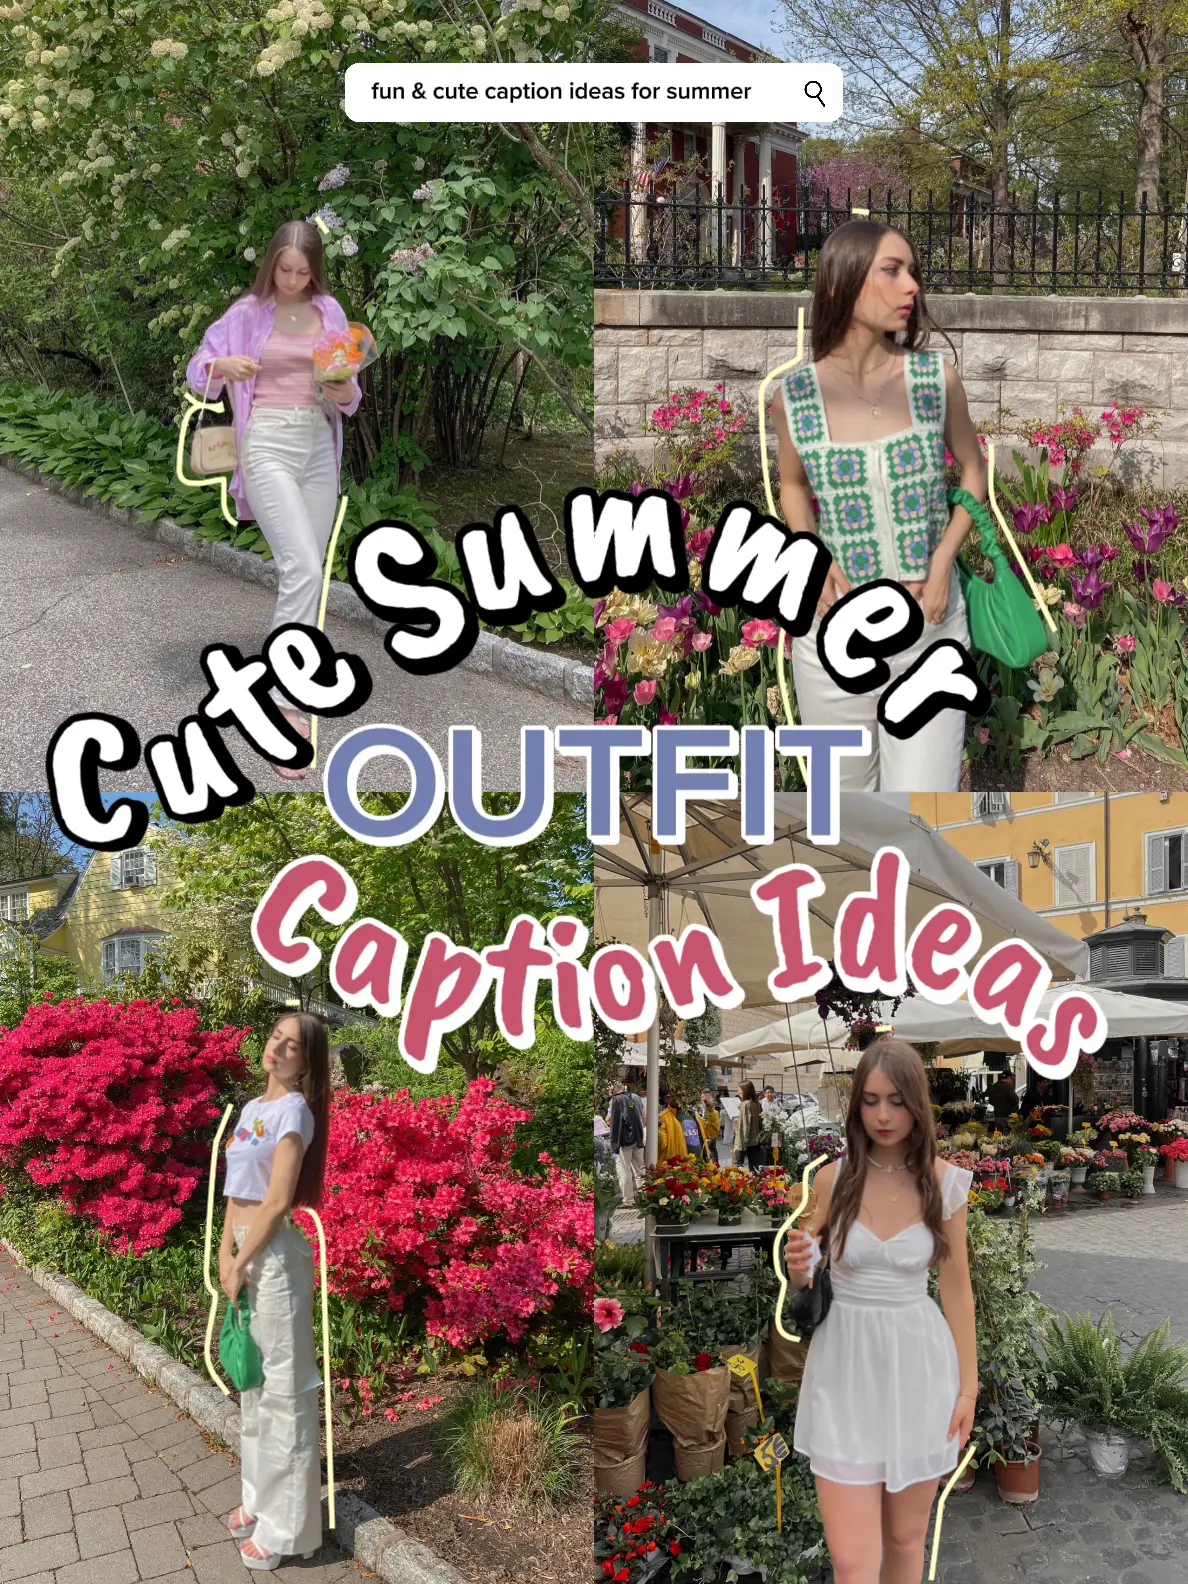 Cute Summer Outfit Caption Ideas 💬💐's images